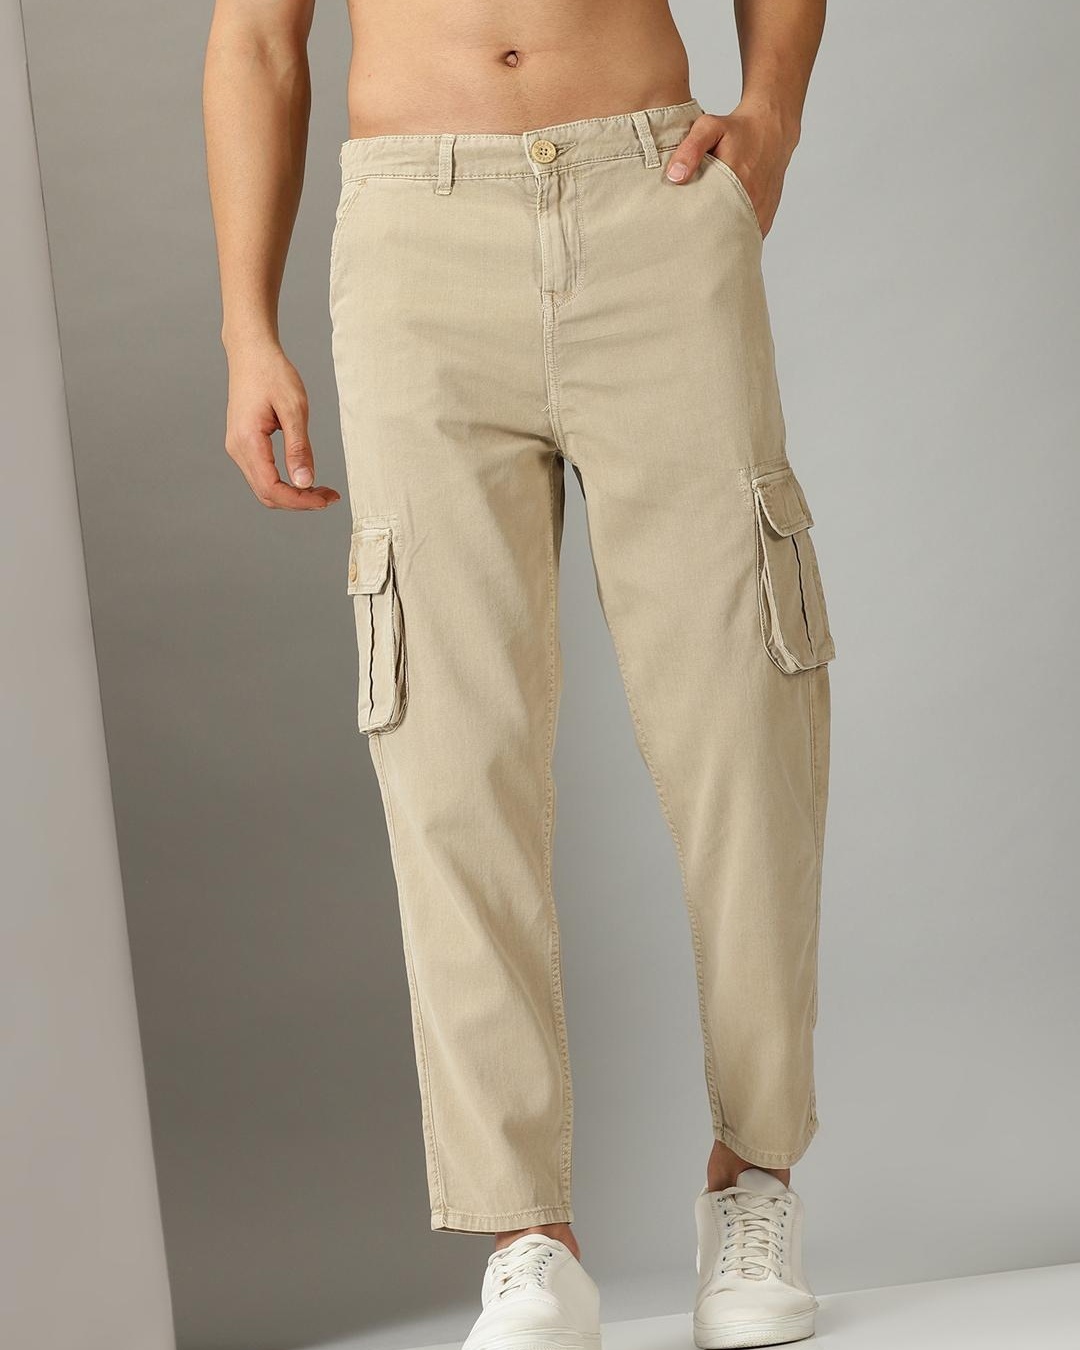 Polyester Solid Women's Cargo Pant, Loose Fit at best price in New Delhi |  ID: 2852575212430